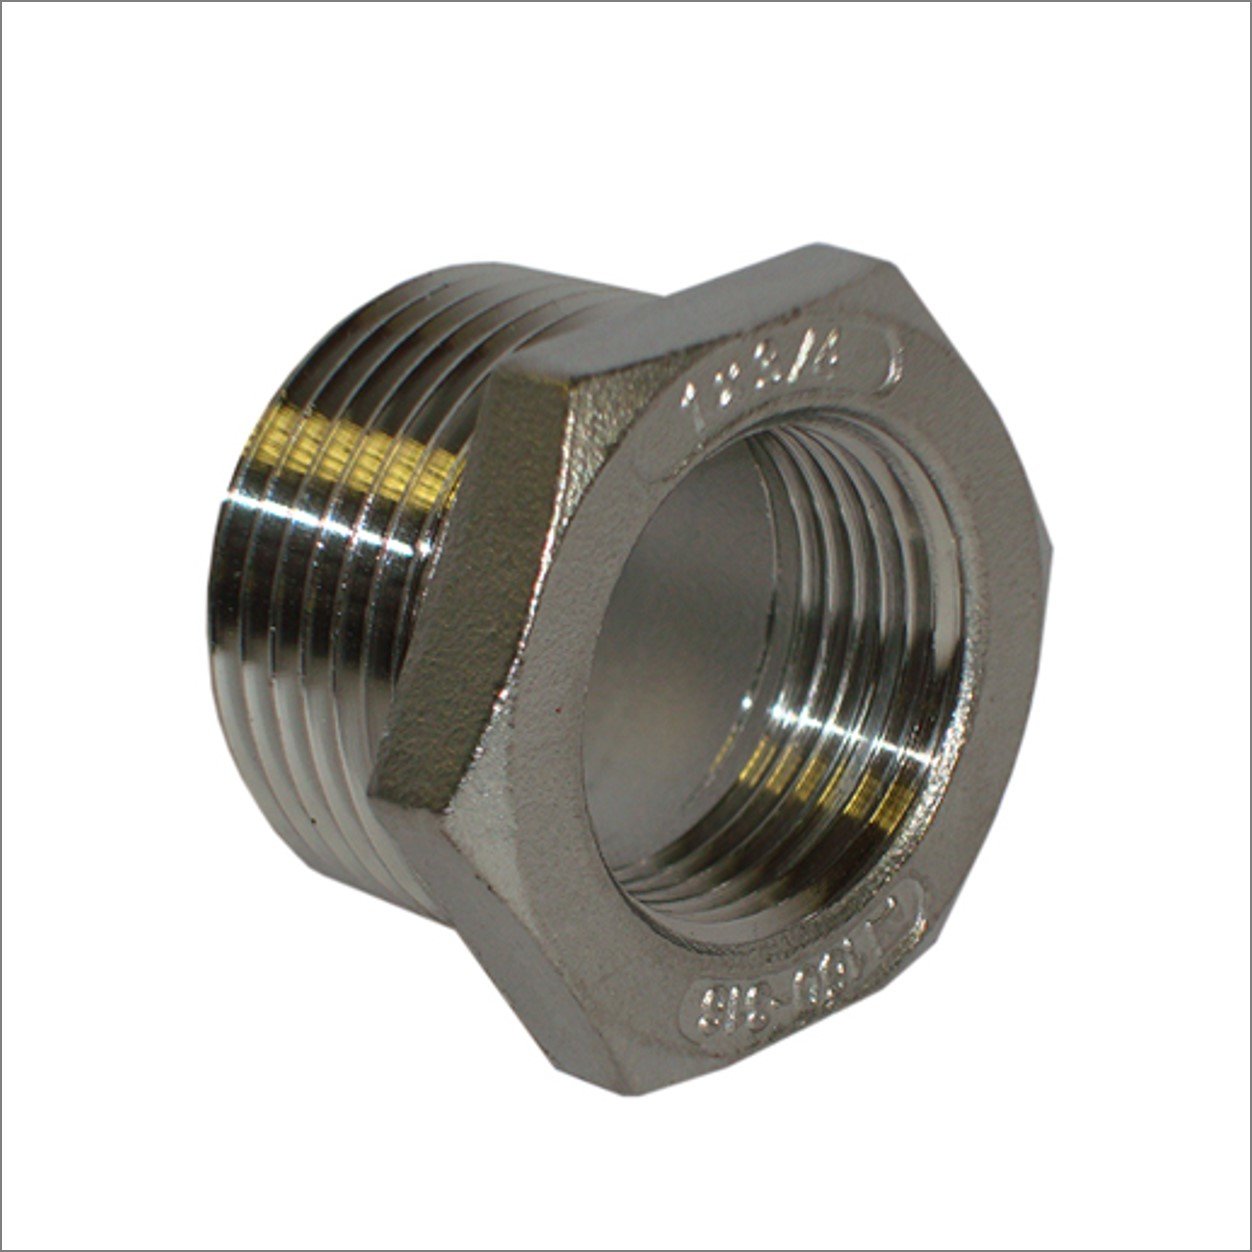 1 1/4" Male x 3/4" female BSPT HEX REDUCING BUSH STAINLESS STEEL PIPE FITTINGS